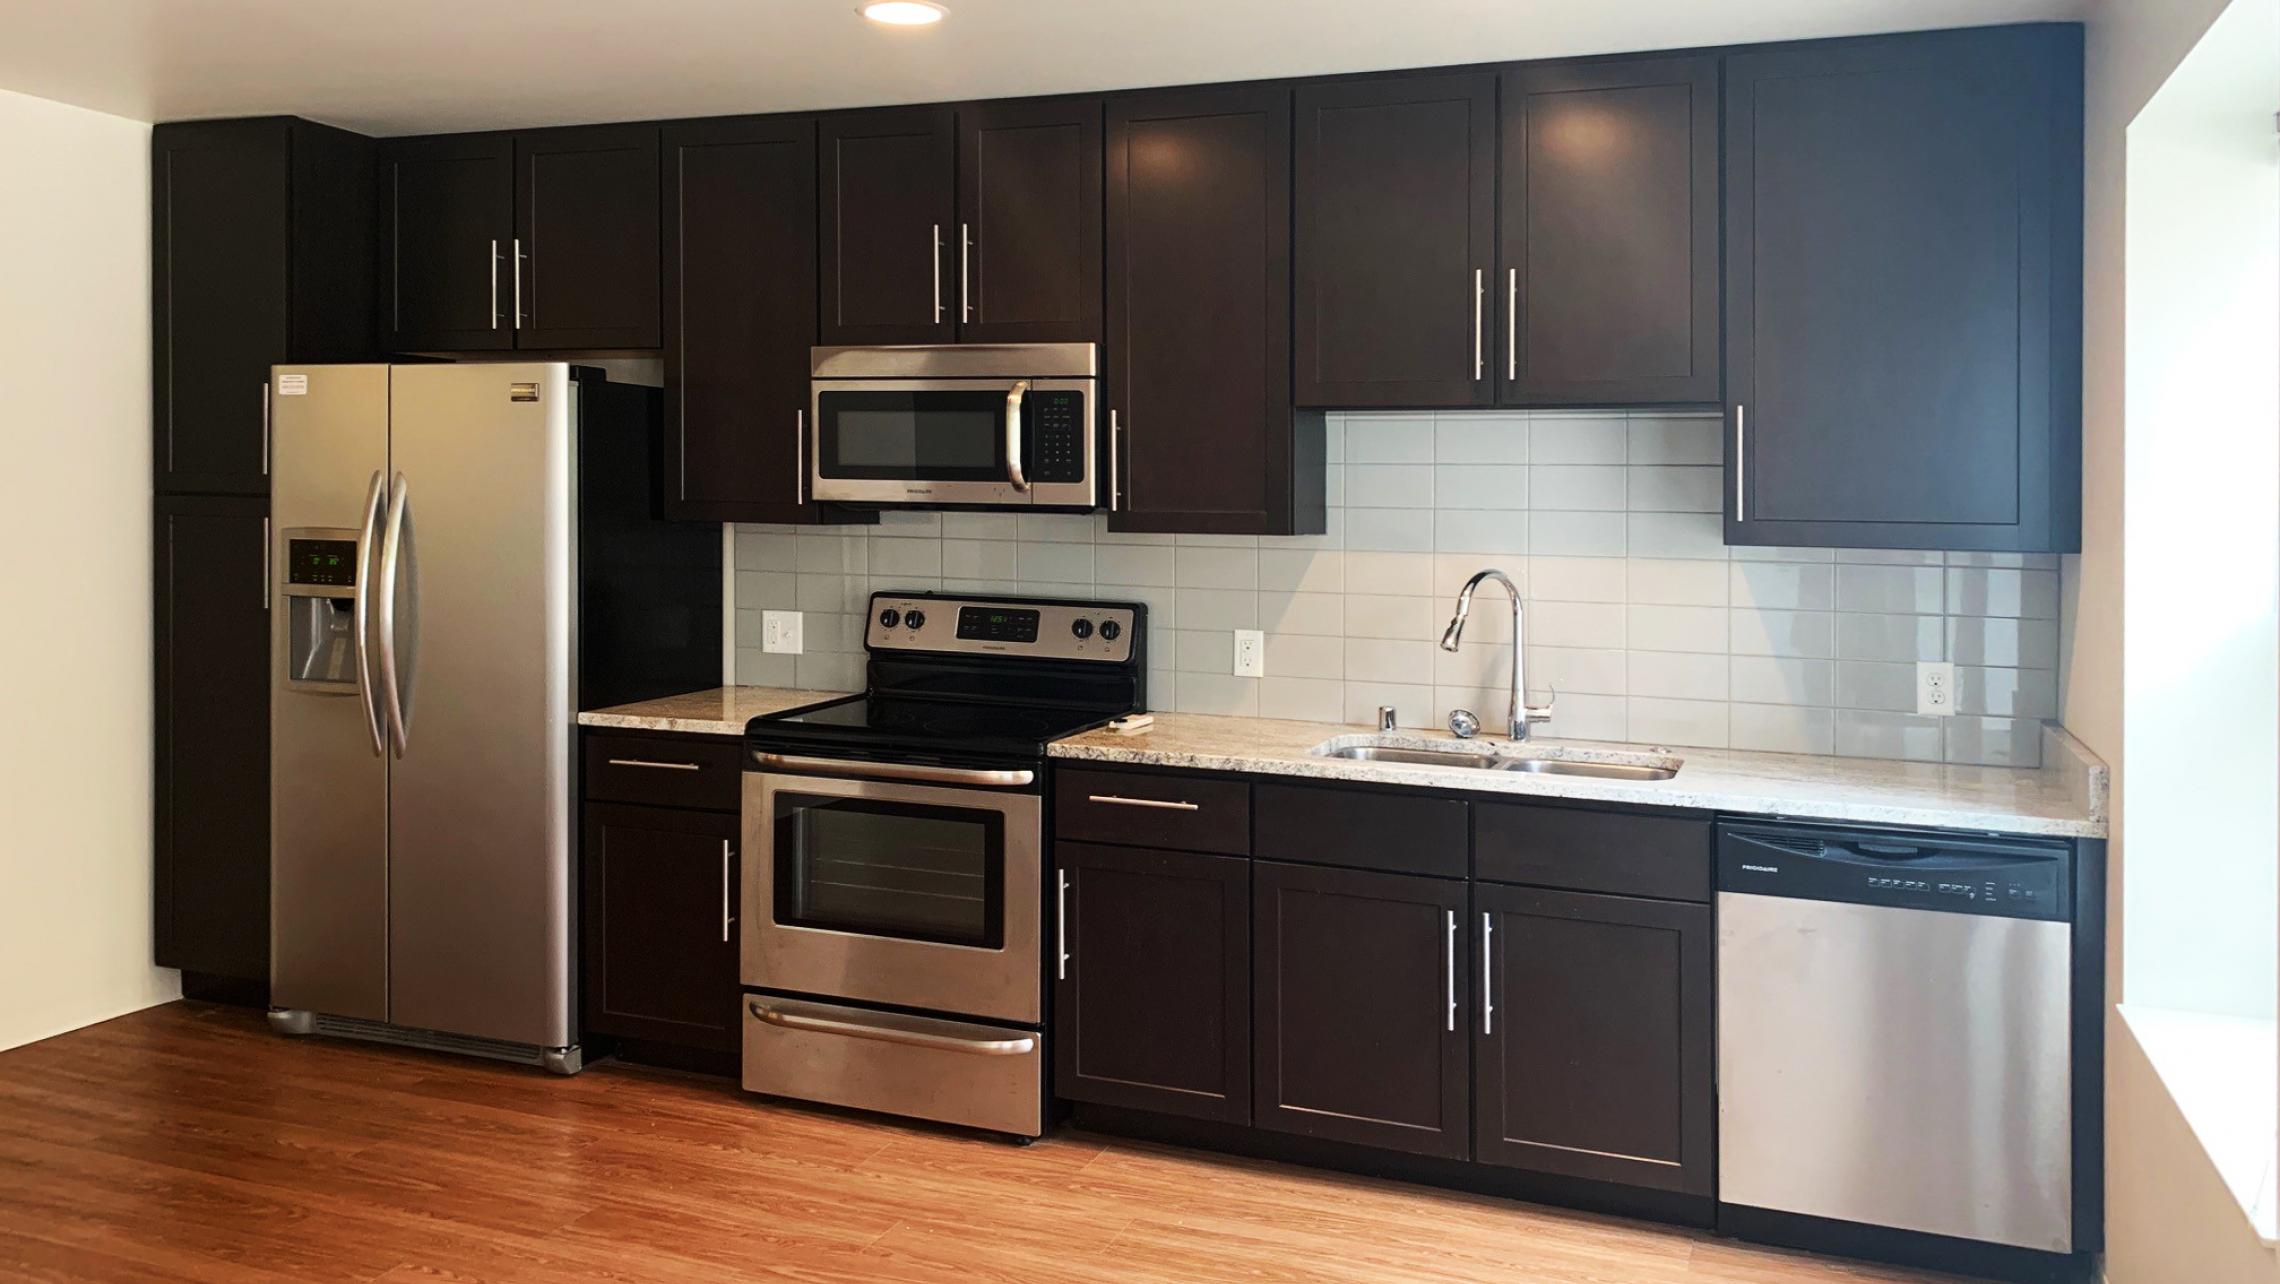 Capitol-Hill-Apartments-305-One-Bedroom-Kitchen-Downtown-Madison-Square-Luxury-Modern